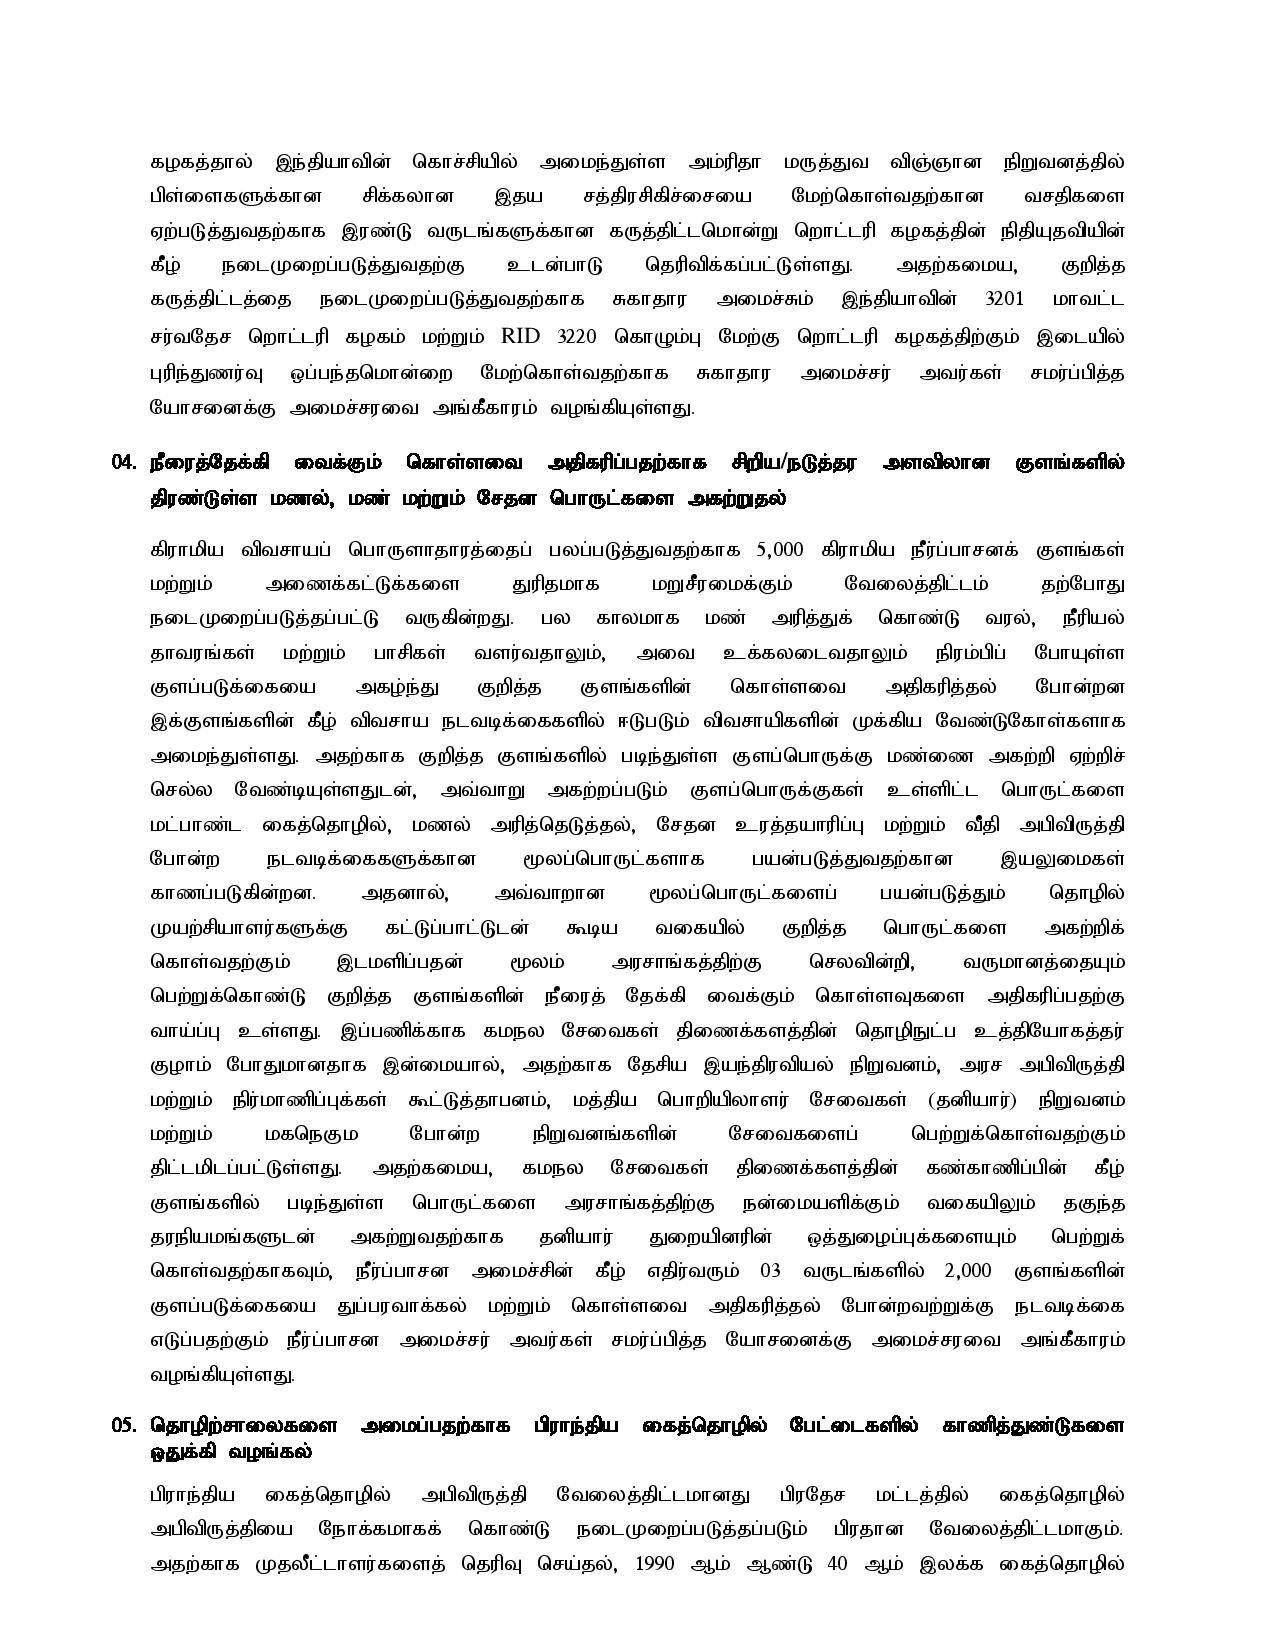 Cabinet Decisions on 27.09.2021 Tamil page 002